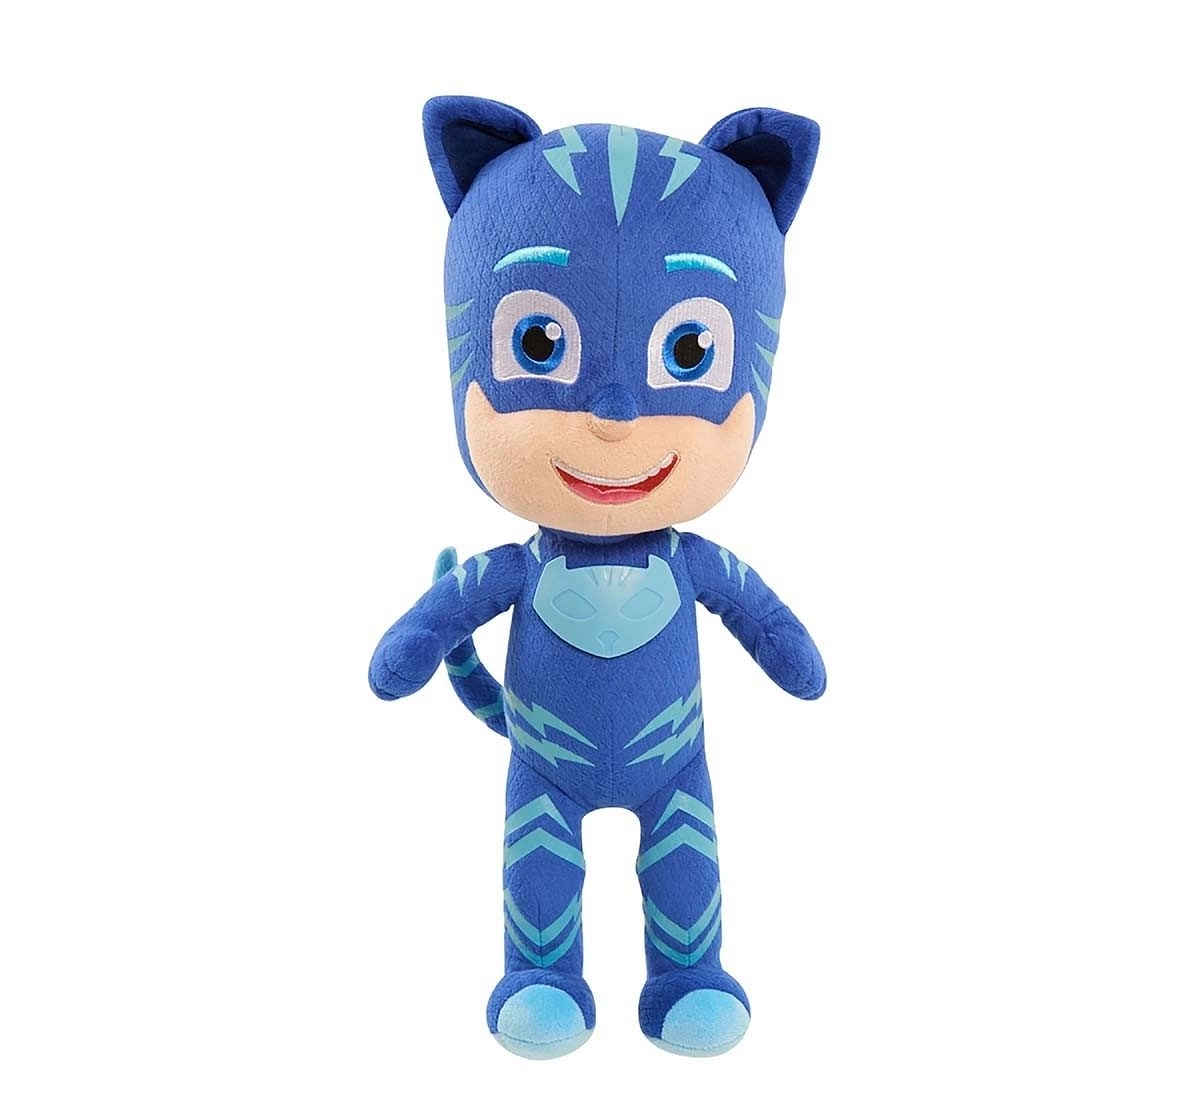 Pj Mask Beans Mini Plush Assorted Character Soft Toys for Kids age 3Y+ - 18.74 Cm 